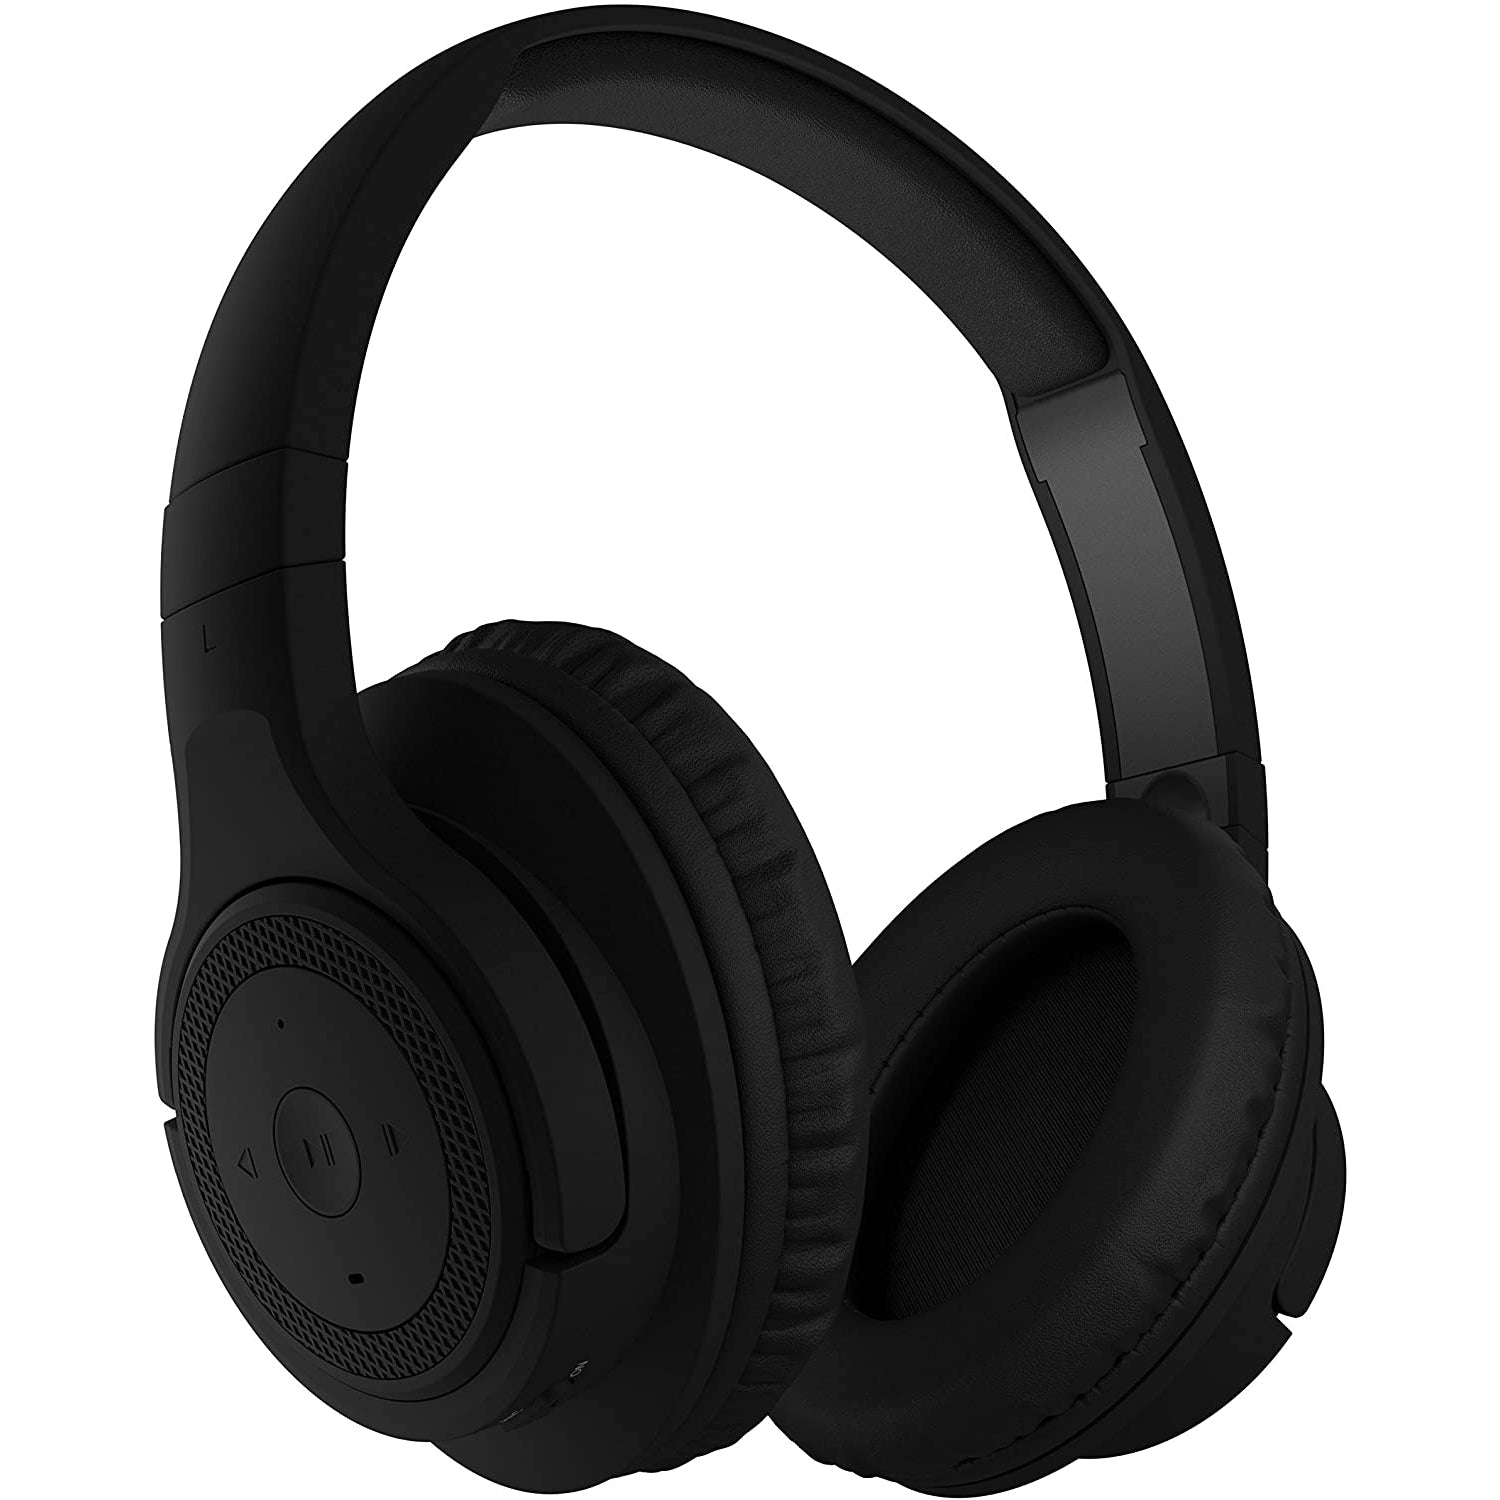 KitSound Engage Wireless Bluetooth On Ear Headphones with Active Noise Cancelling - Black